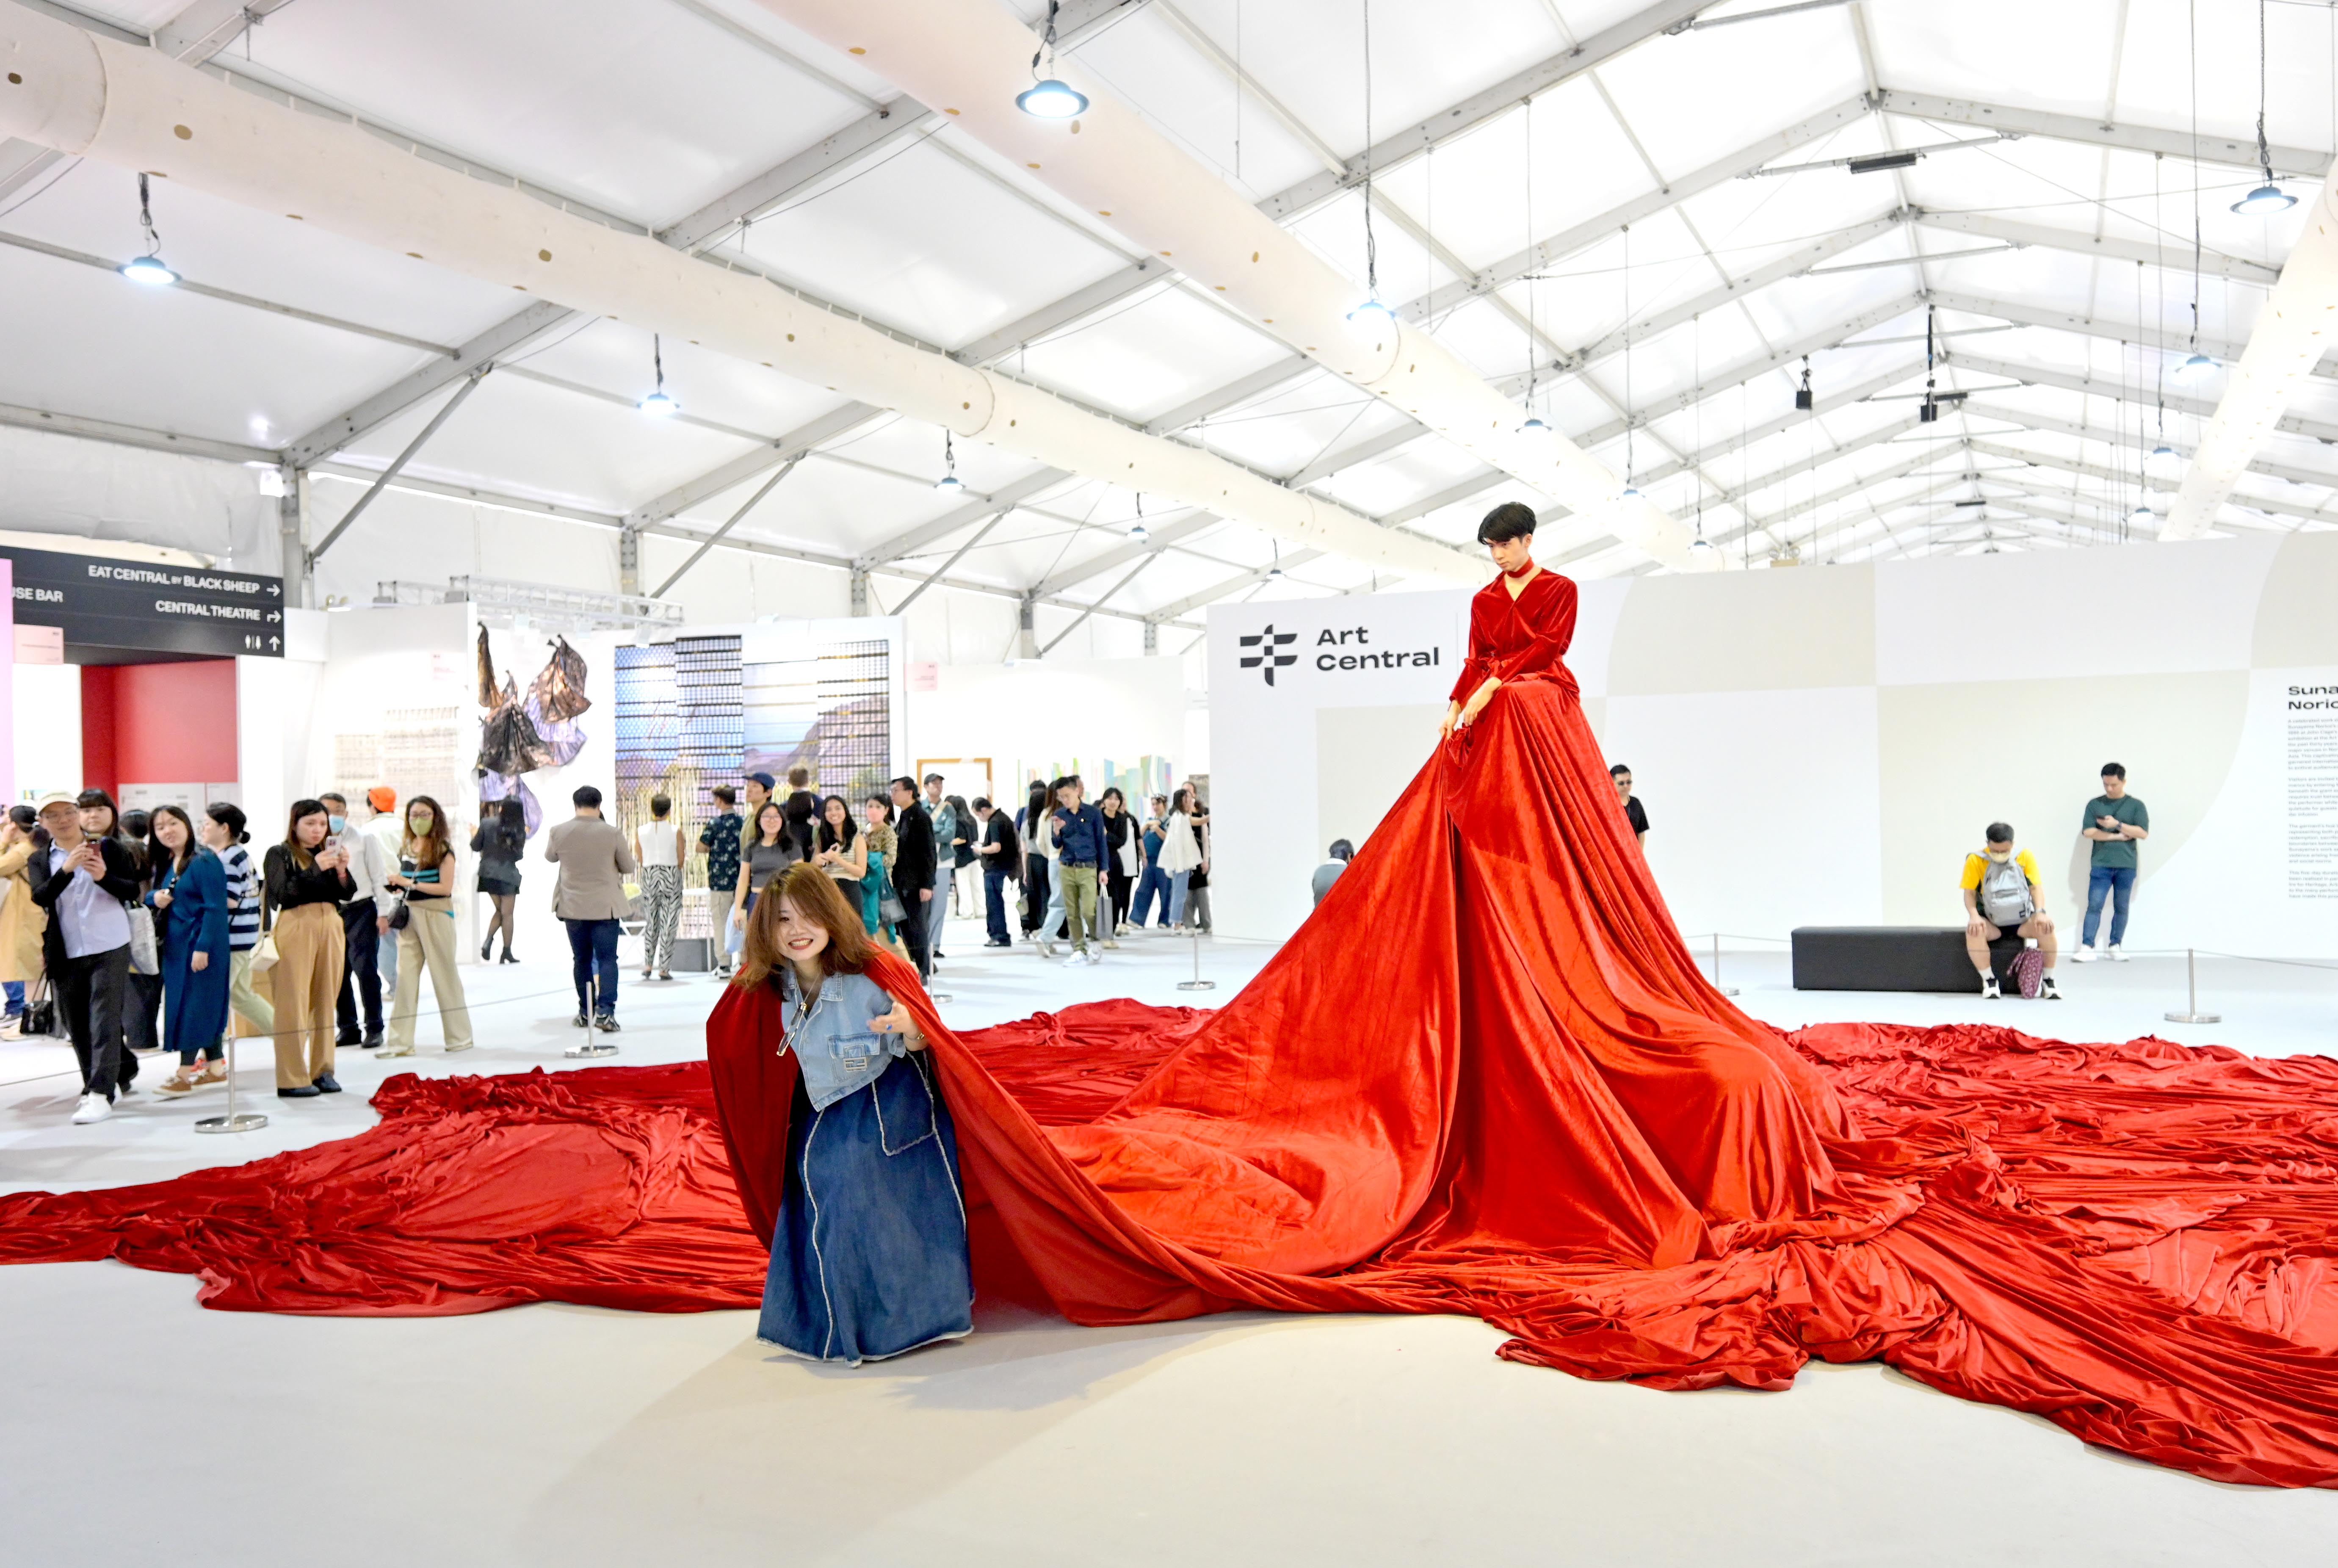 Art Central welcomed over 41,000 visitors to view contemporary artworks by emerging talents.